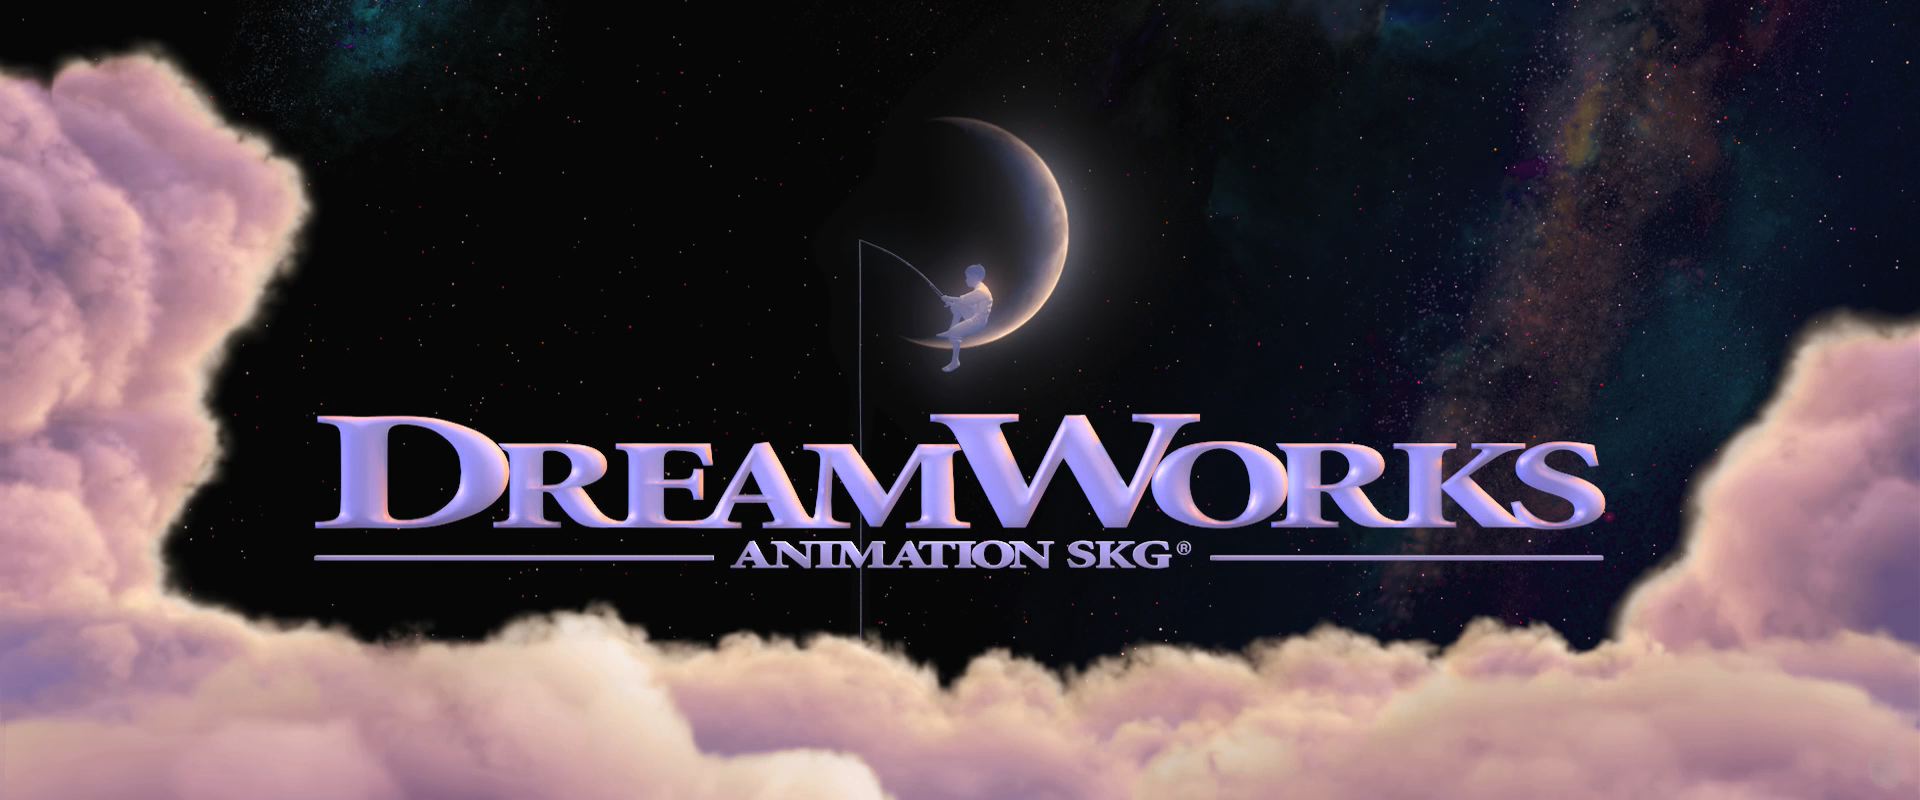 Dreamworks Studio Logo Showing Crescent Moon In A Night - Dreamworks Animation , HD Wallpaper & Backgrounds